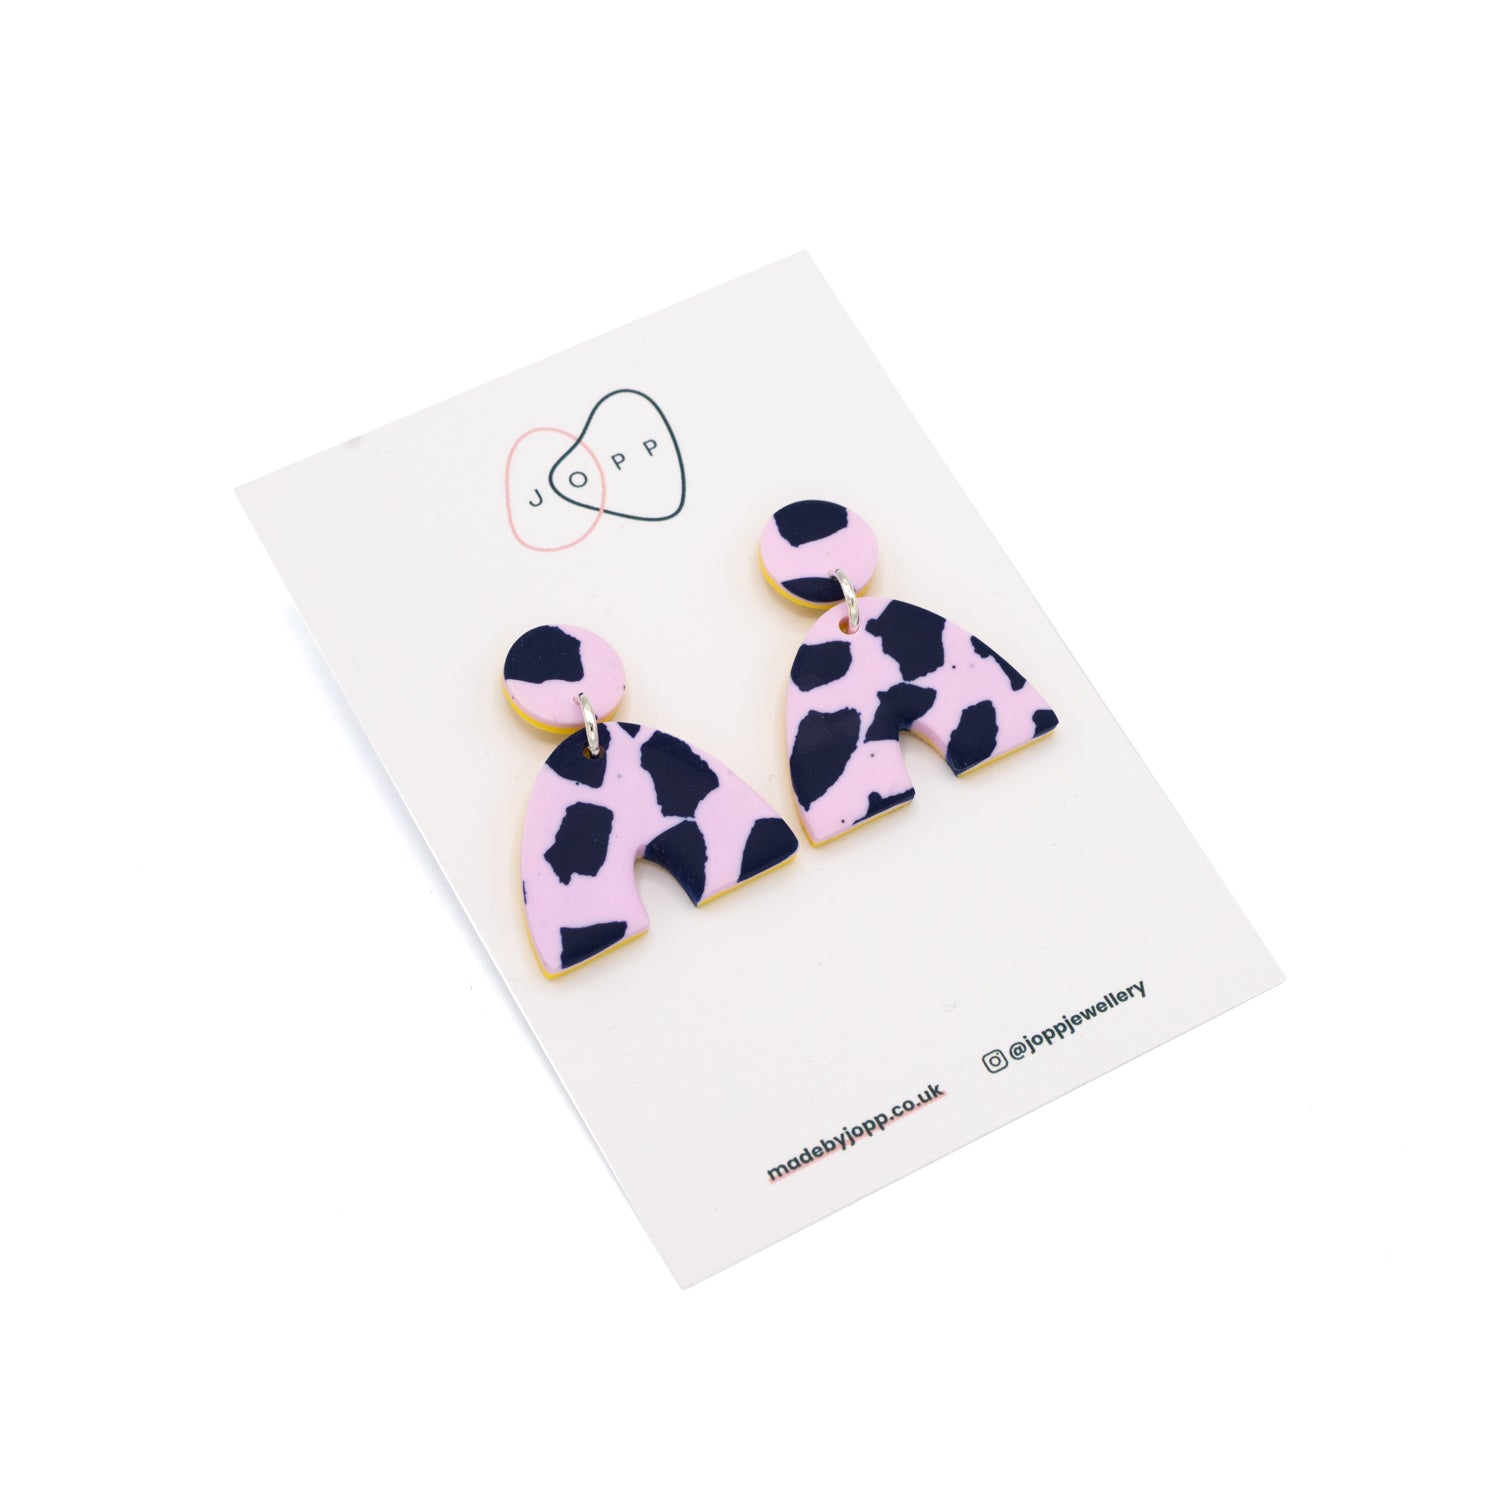 Earrings in a horseshoe shape photographed on top of backing card with Jopp branding. The earrings have a pink and navy cow print pattern.